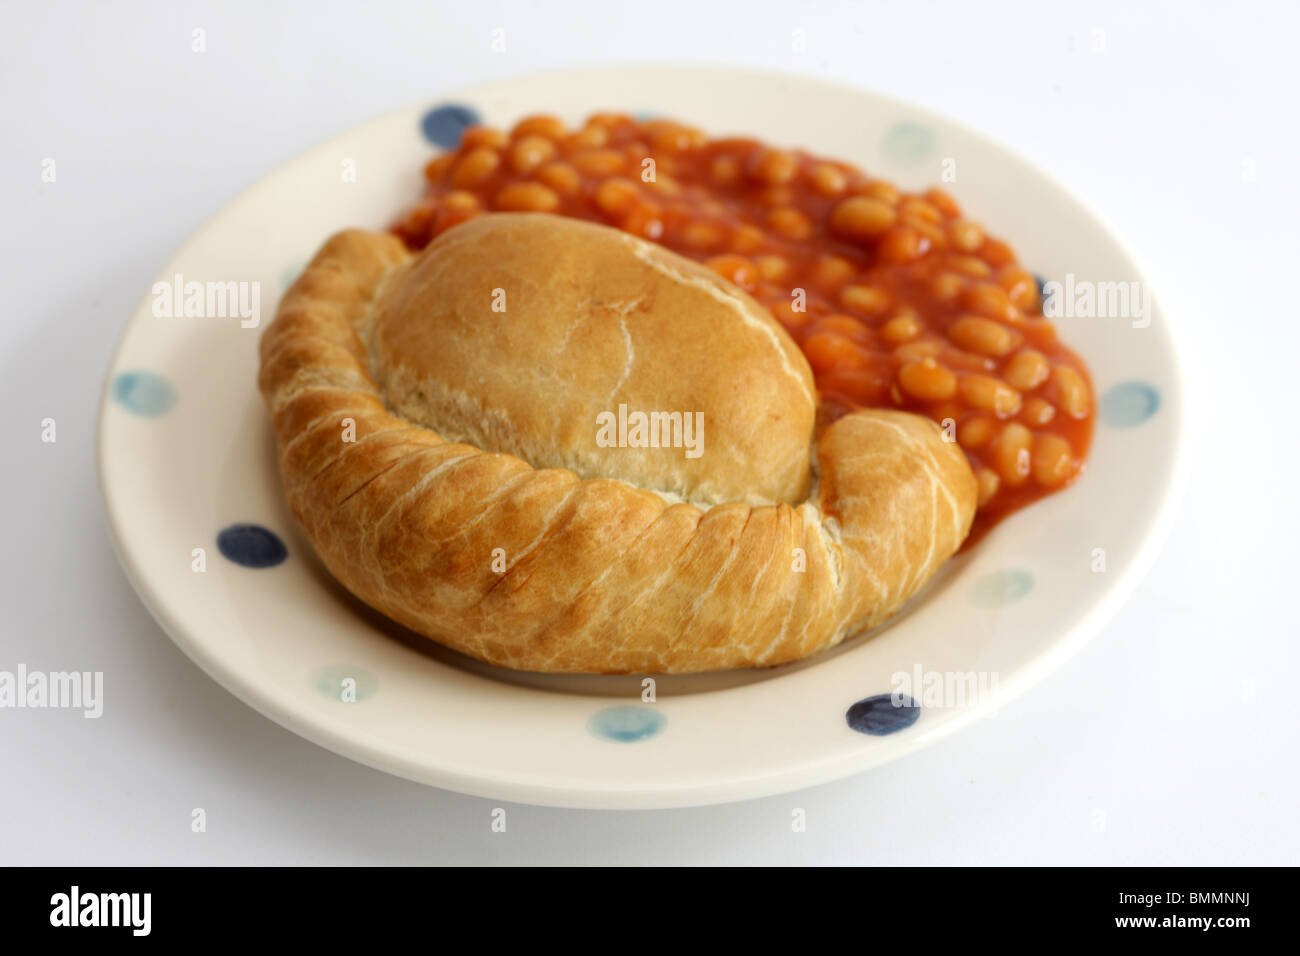 Cornish Pasty, Haricots Banque D'Images